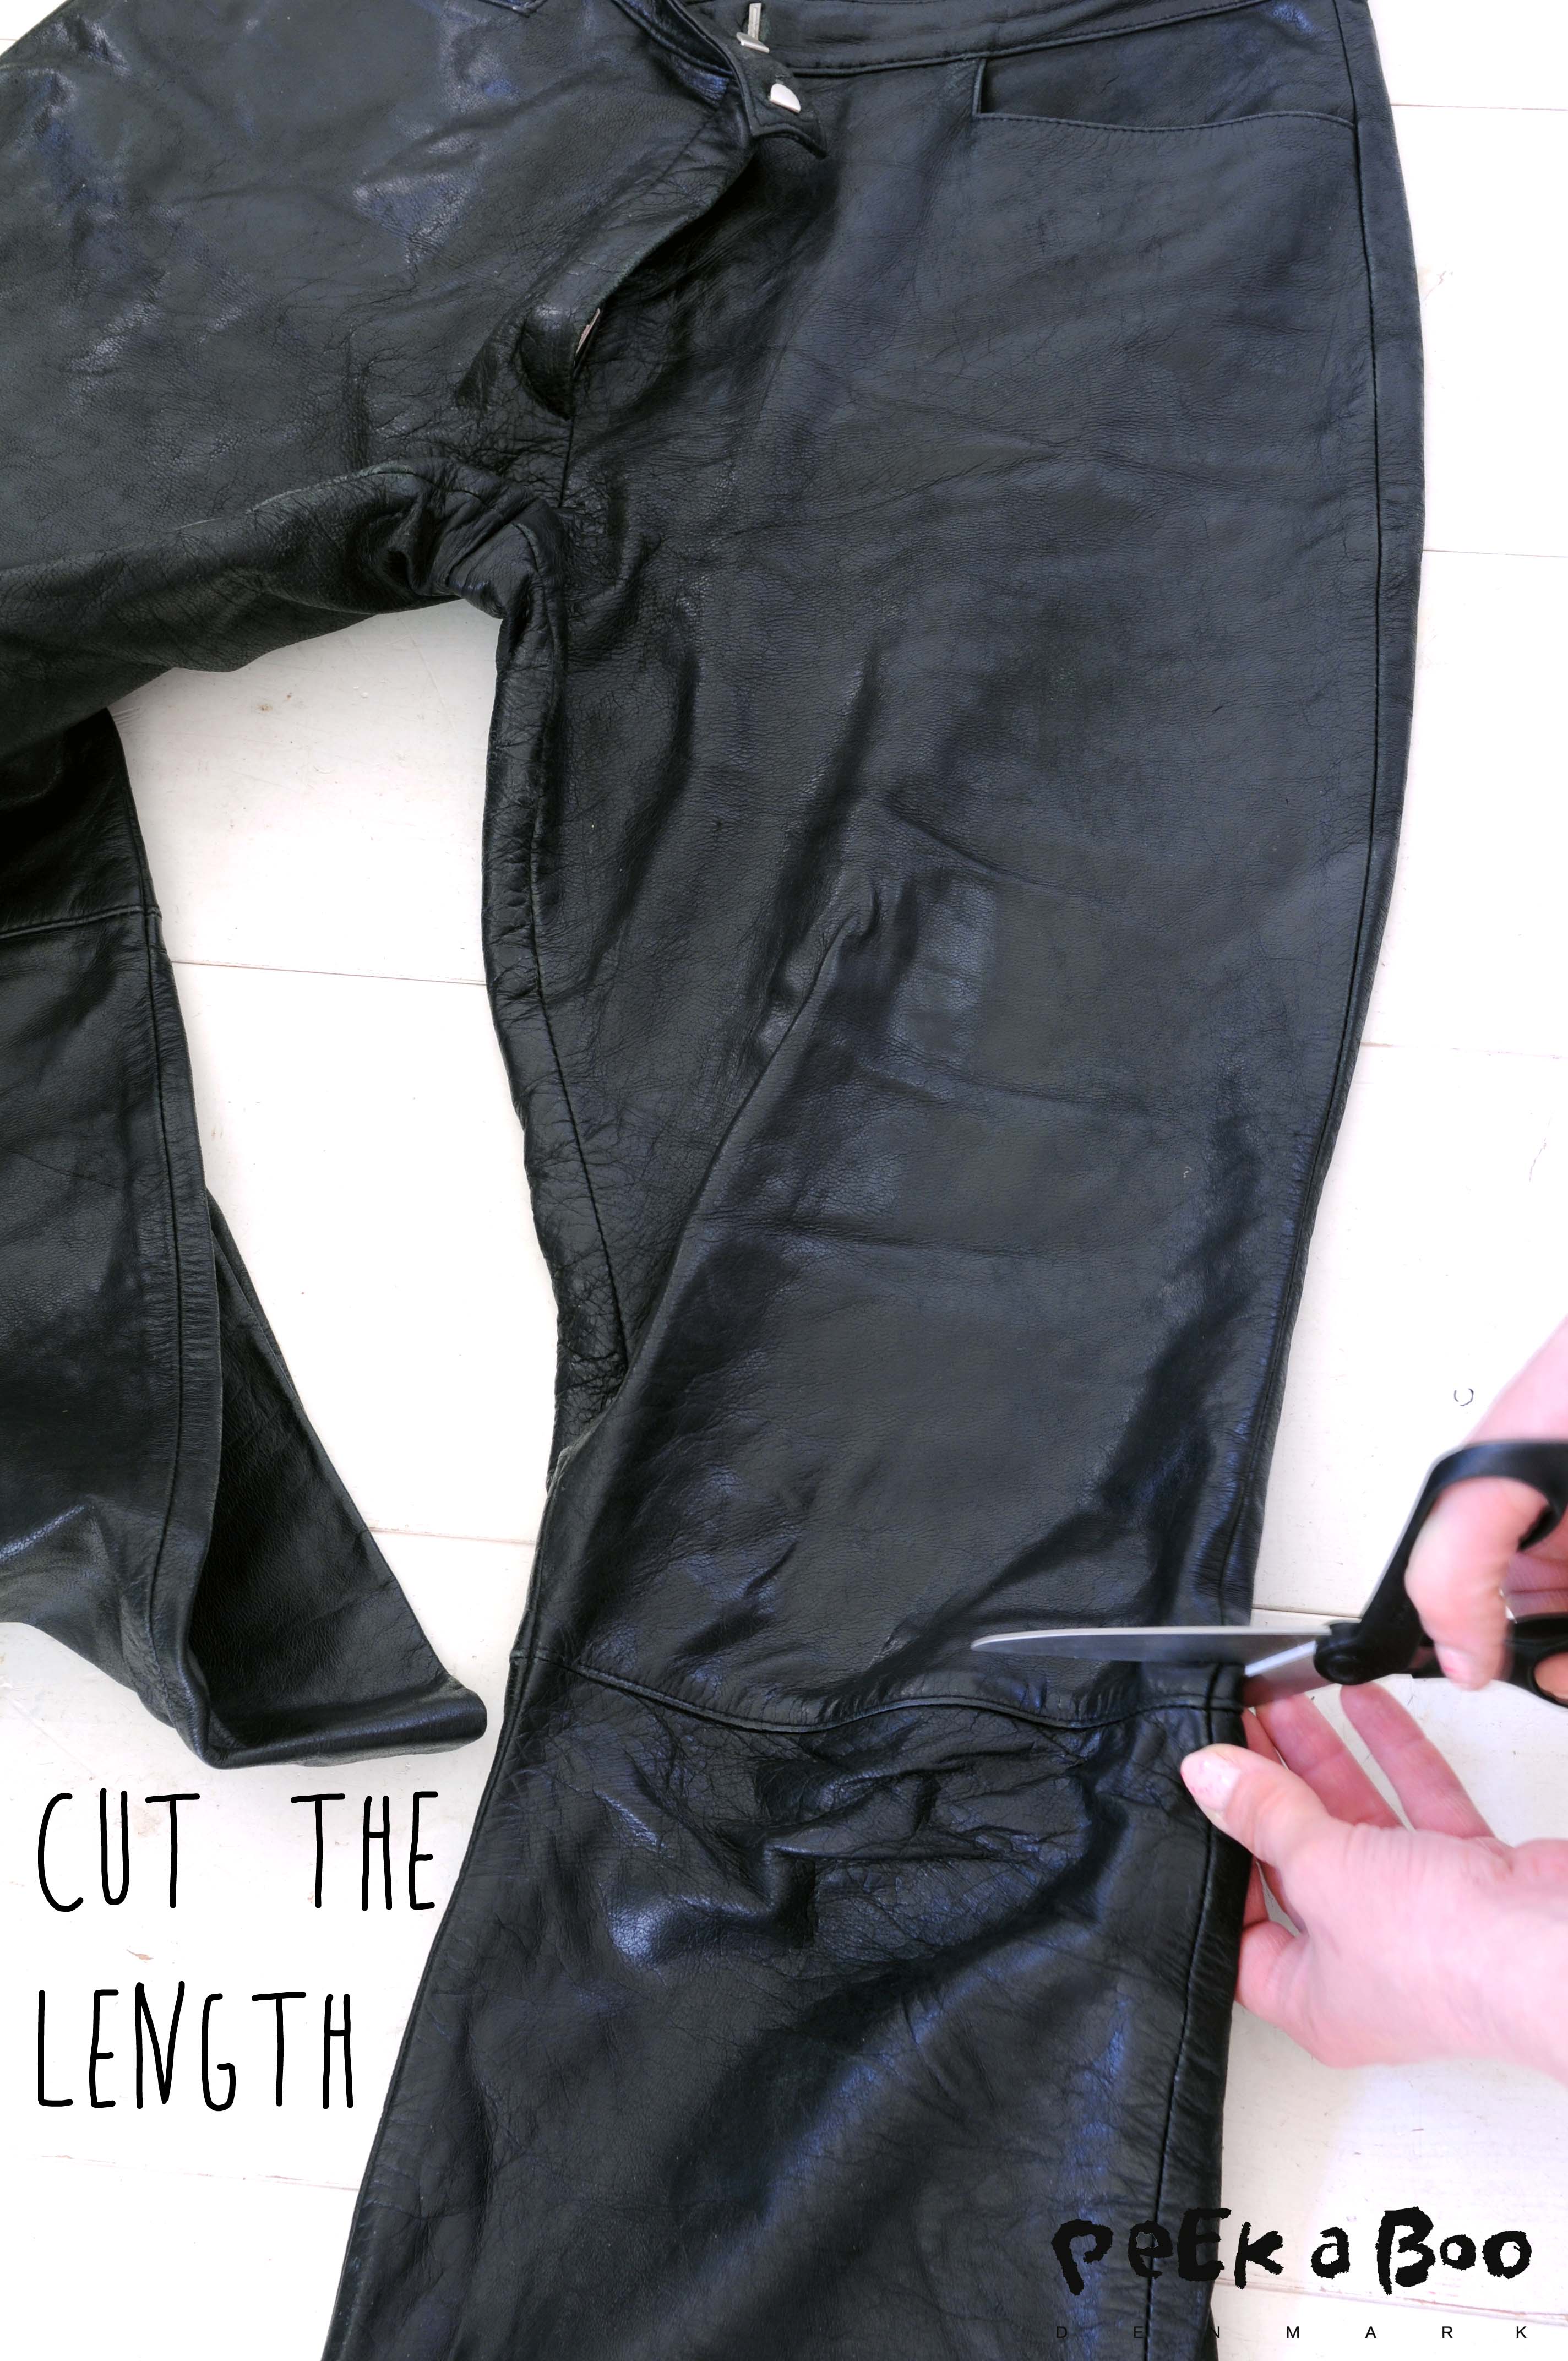 Cut off the length just above the knee. Fold the lining out, so you don't cut that yet.